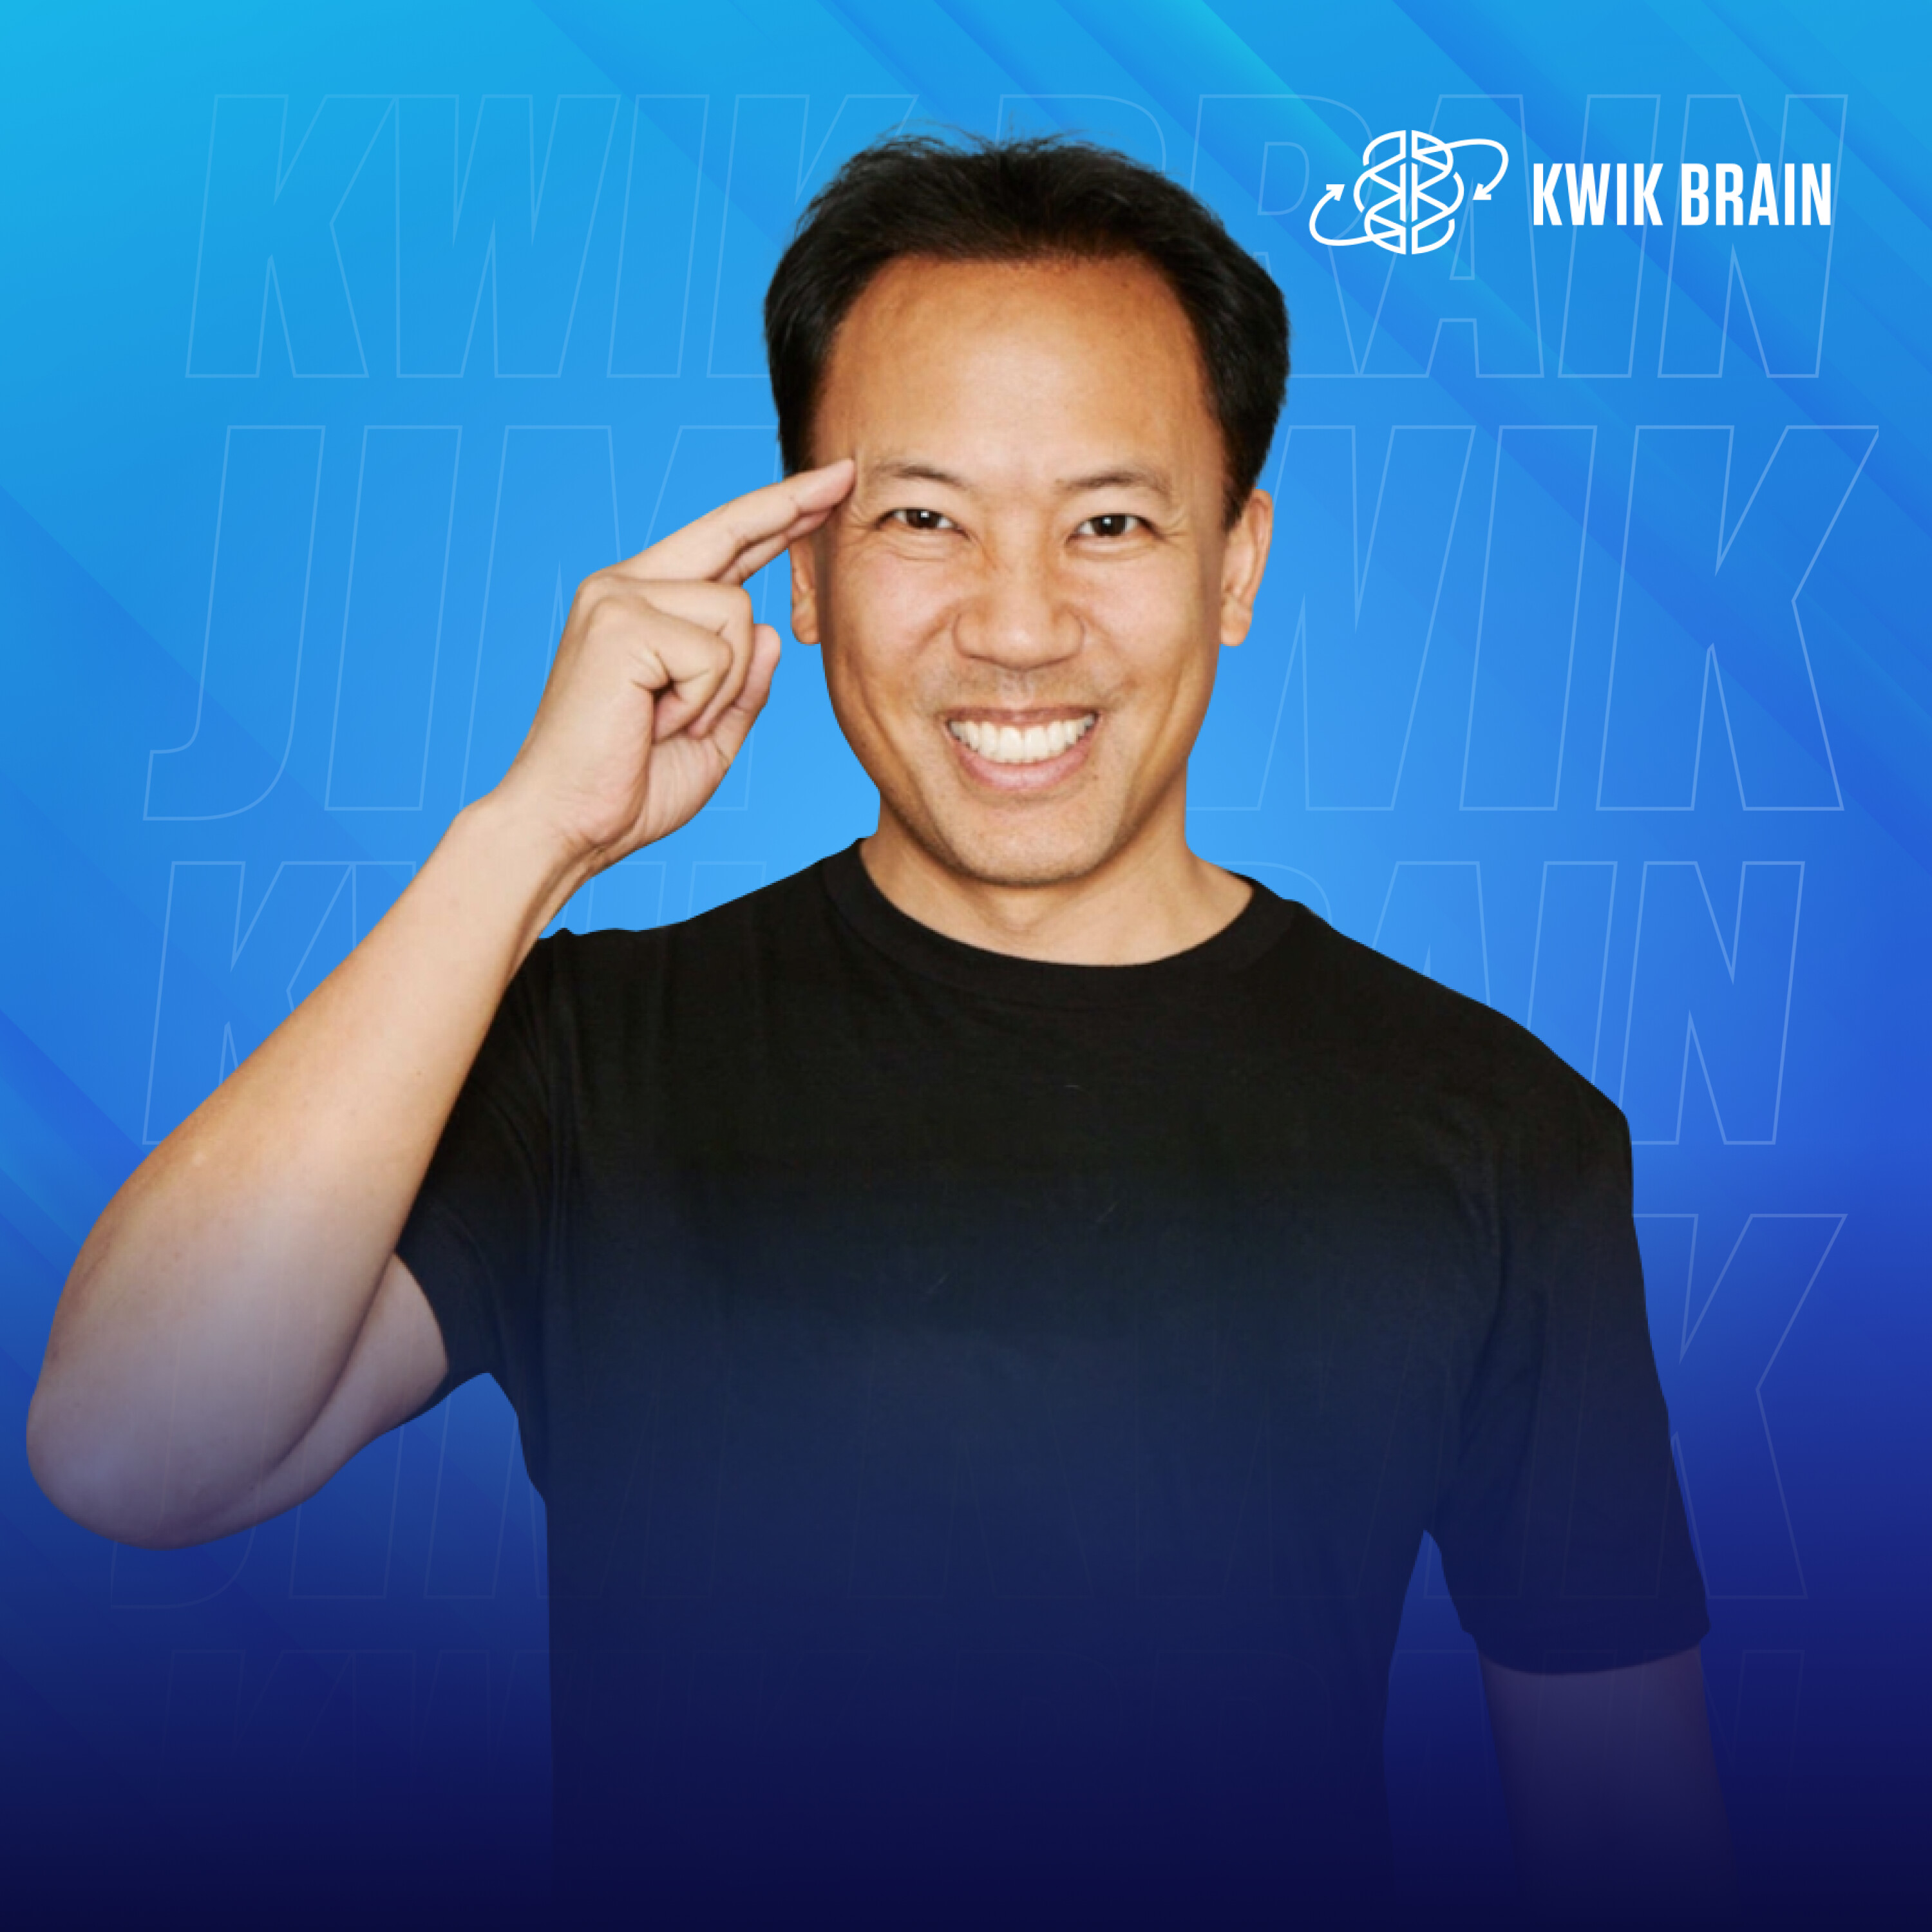 Break the Limit: Why 1% More Effort Can Change Your Life with Jim Kwik